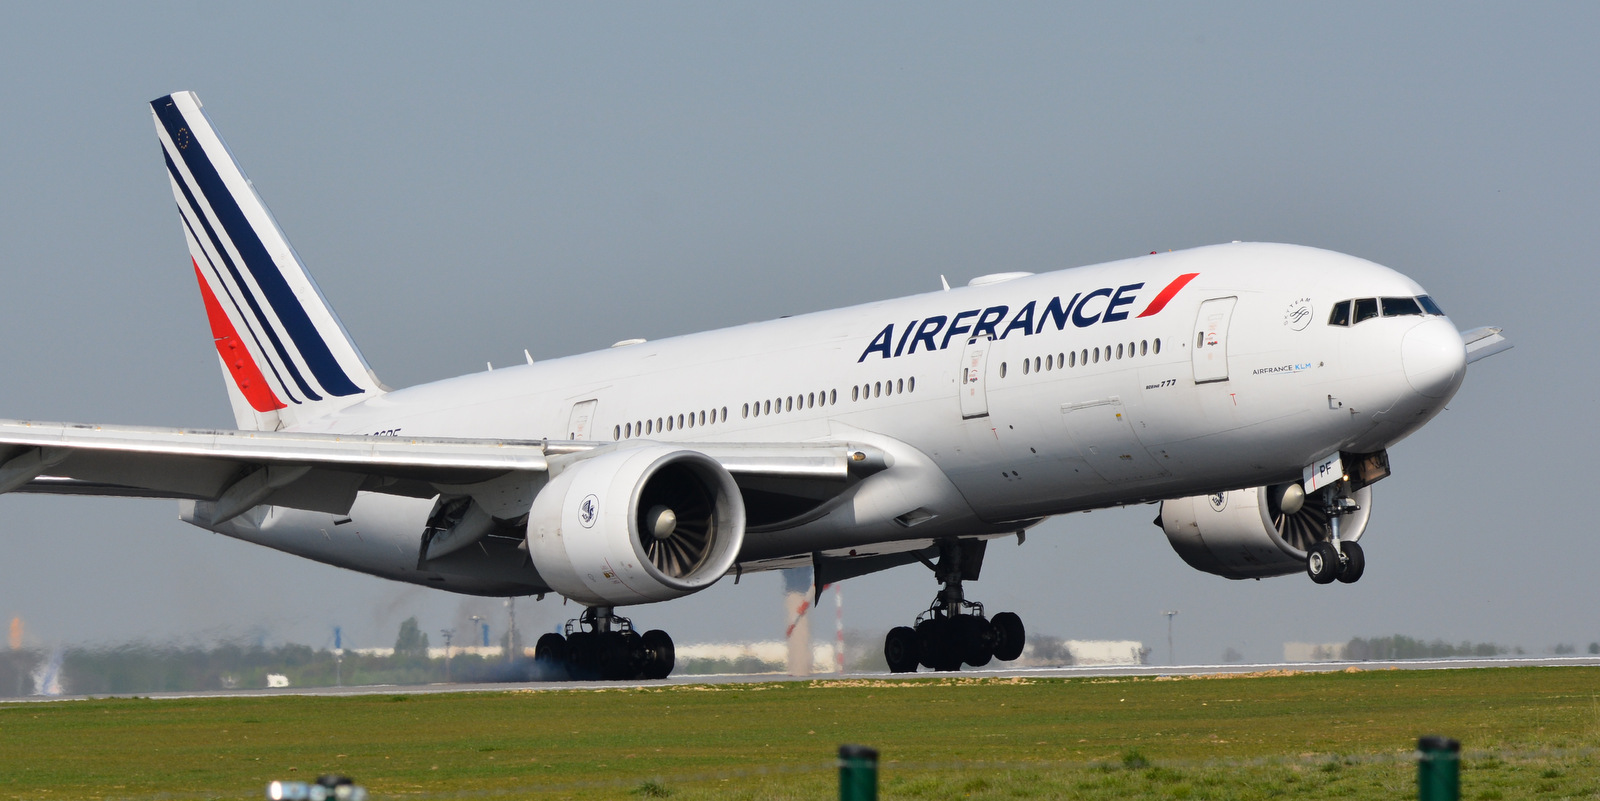 An Air France Boeing 777 takes off.